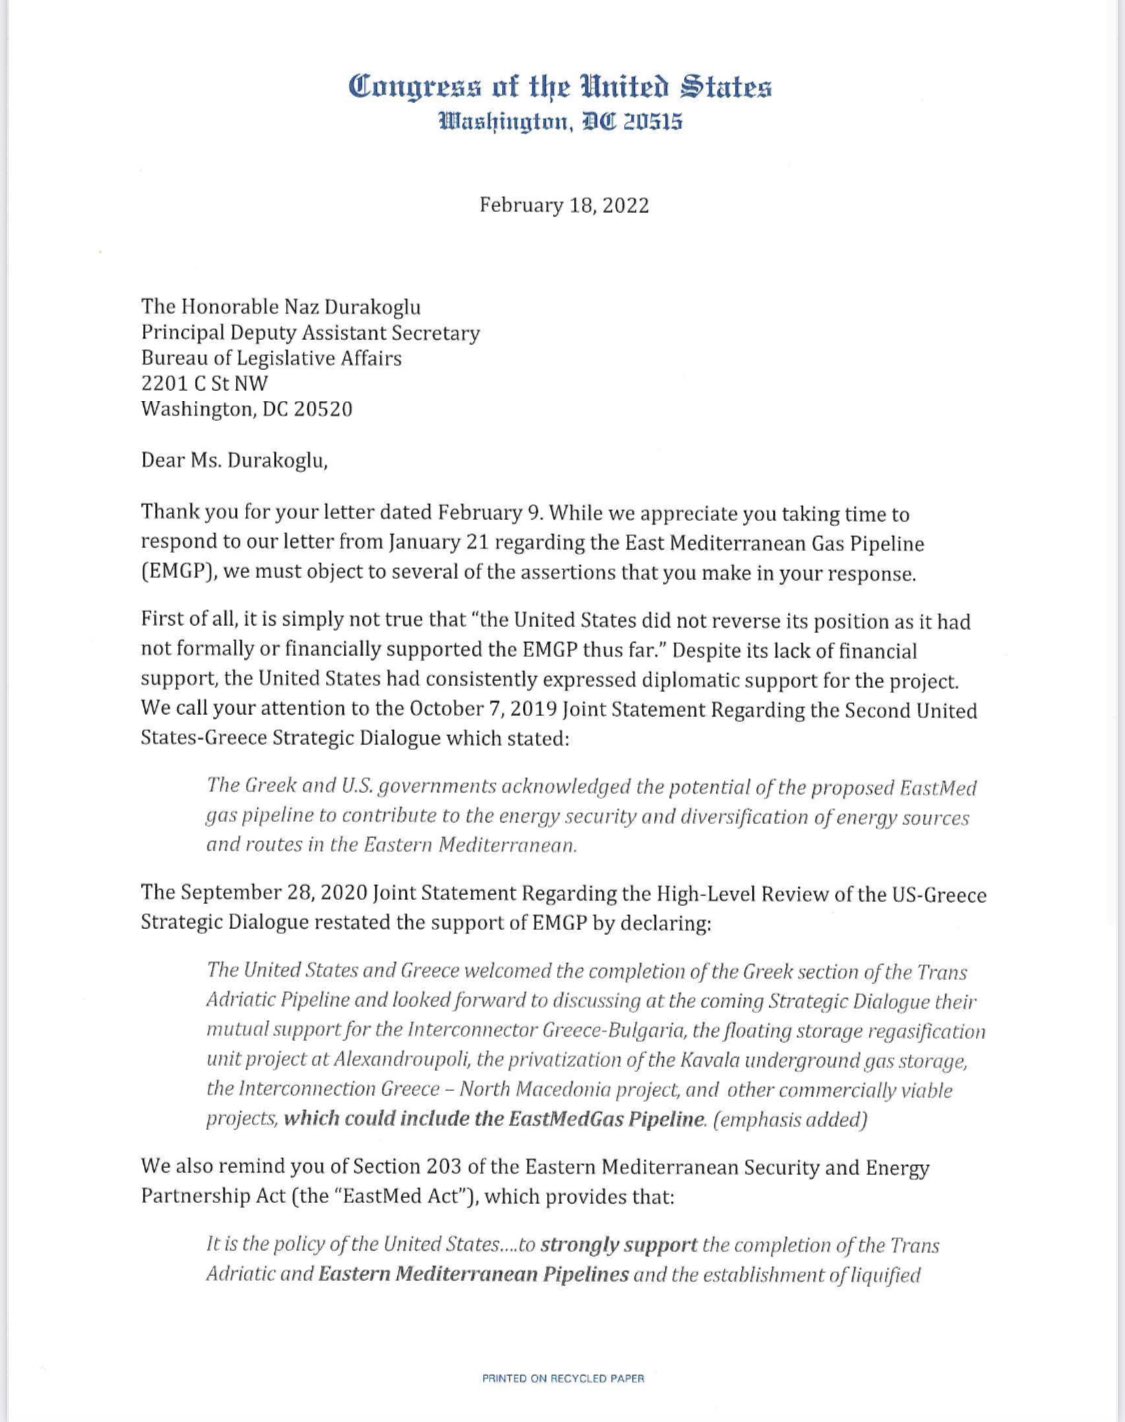 HellenicLeaders on Twitter: ".@RepGusBilirakis and Rep @NMalliotakis  continue pushing back against @StateDept's shifting of policy in EastMed  Gas Pipeline. https://t.co/dDgtdgzKbP https://t.co/NpBFAqQ1zw" / Twitter